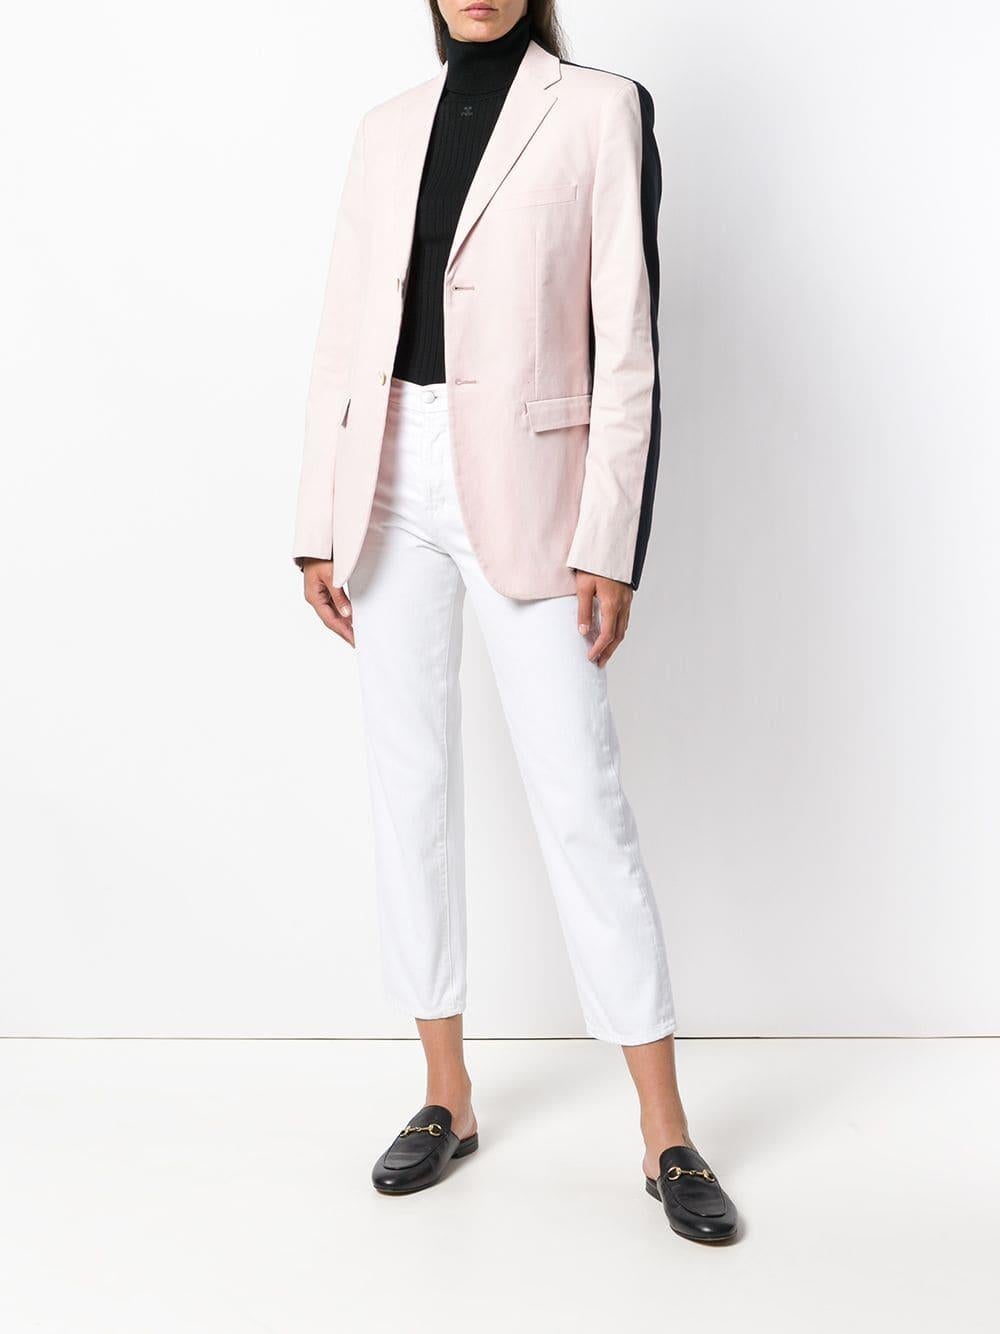 Jil Sander eye-catching blush pink and dark blue stretch cotton contrasting straight blazer jacket for male, with classic lapels, a front buttons fastening, long sleeves, slit cuffs, chest welt pocket, front flap pockets, a rear central vent and a